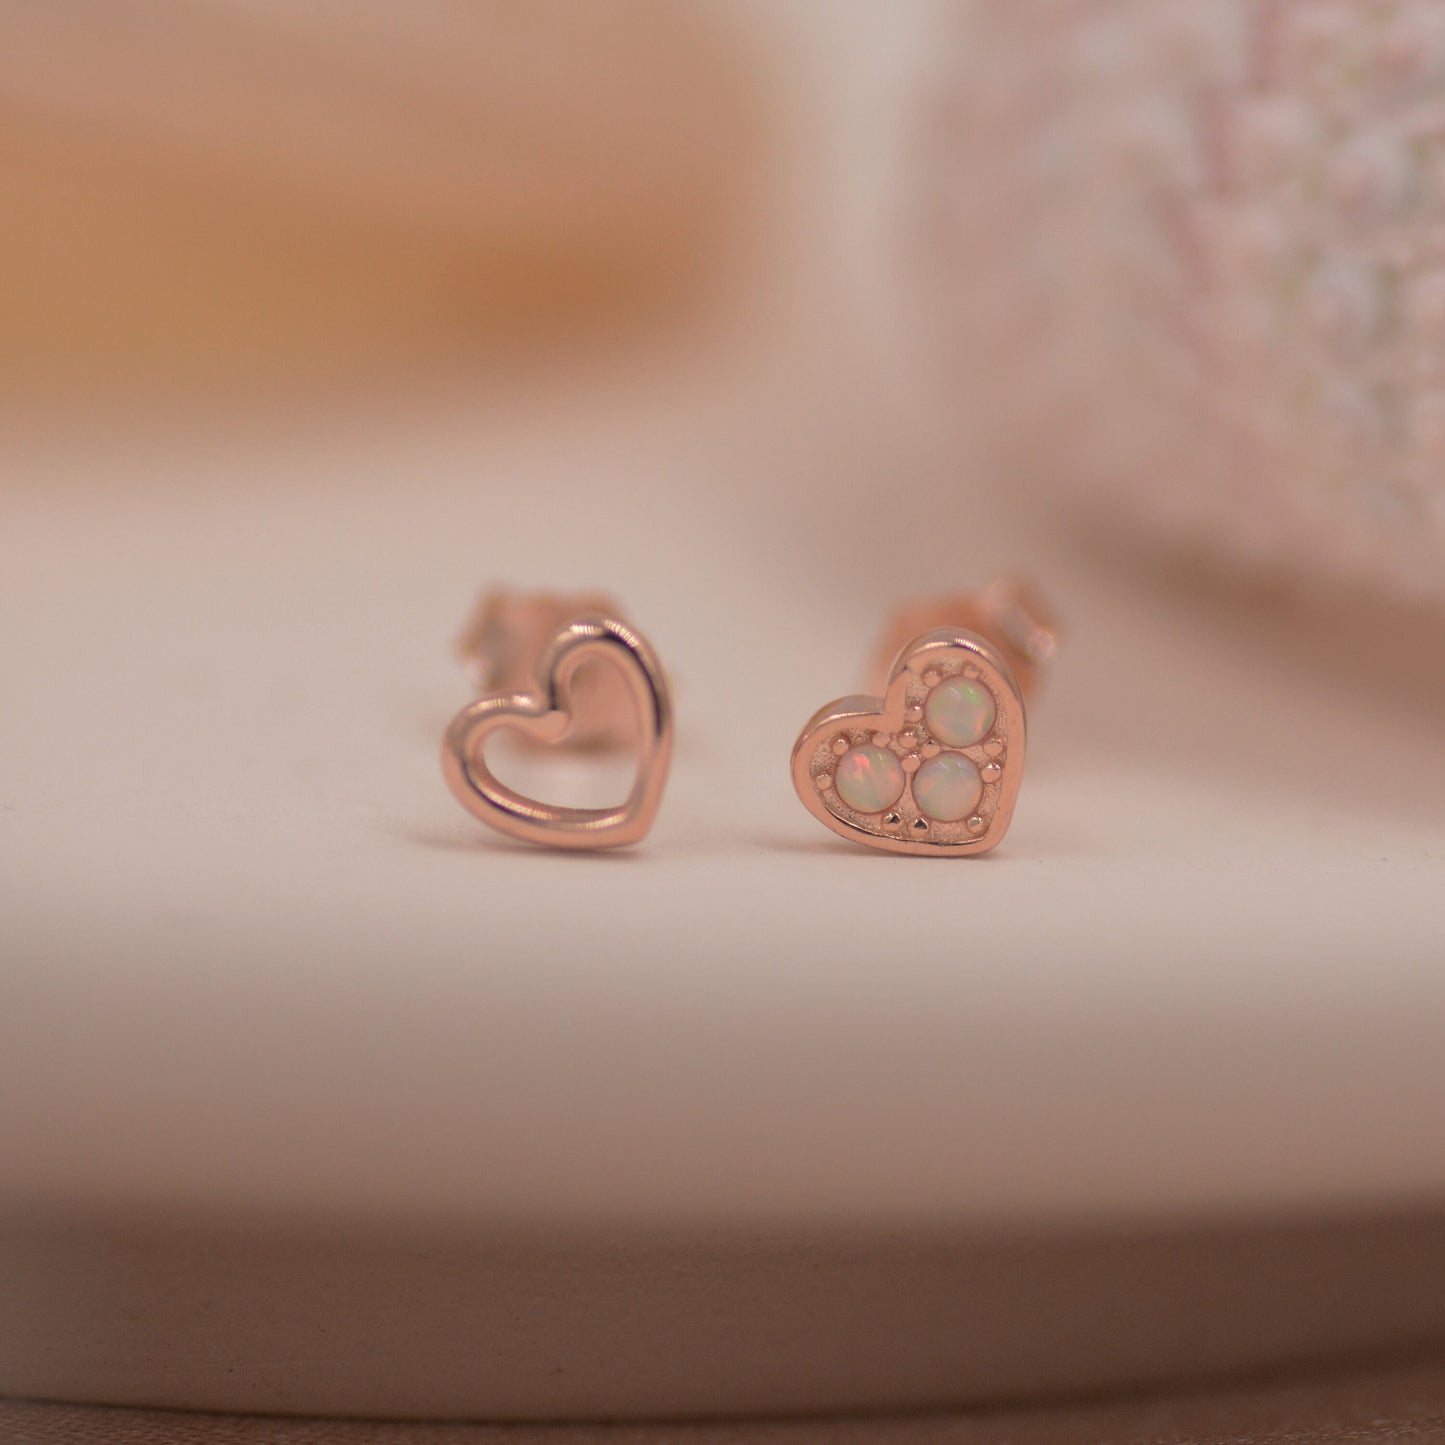 Extra Tiny Opal Heart and Open Heart Mismatched Stud Earrings in Sterling Silver - Gold, Rose Gold and Silver Petite Stud Earrings